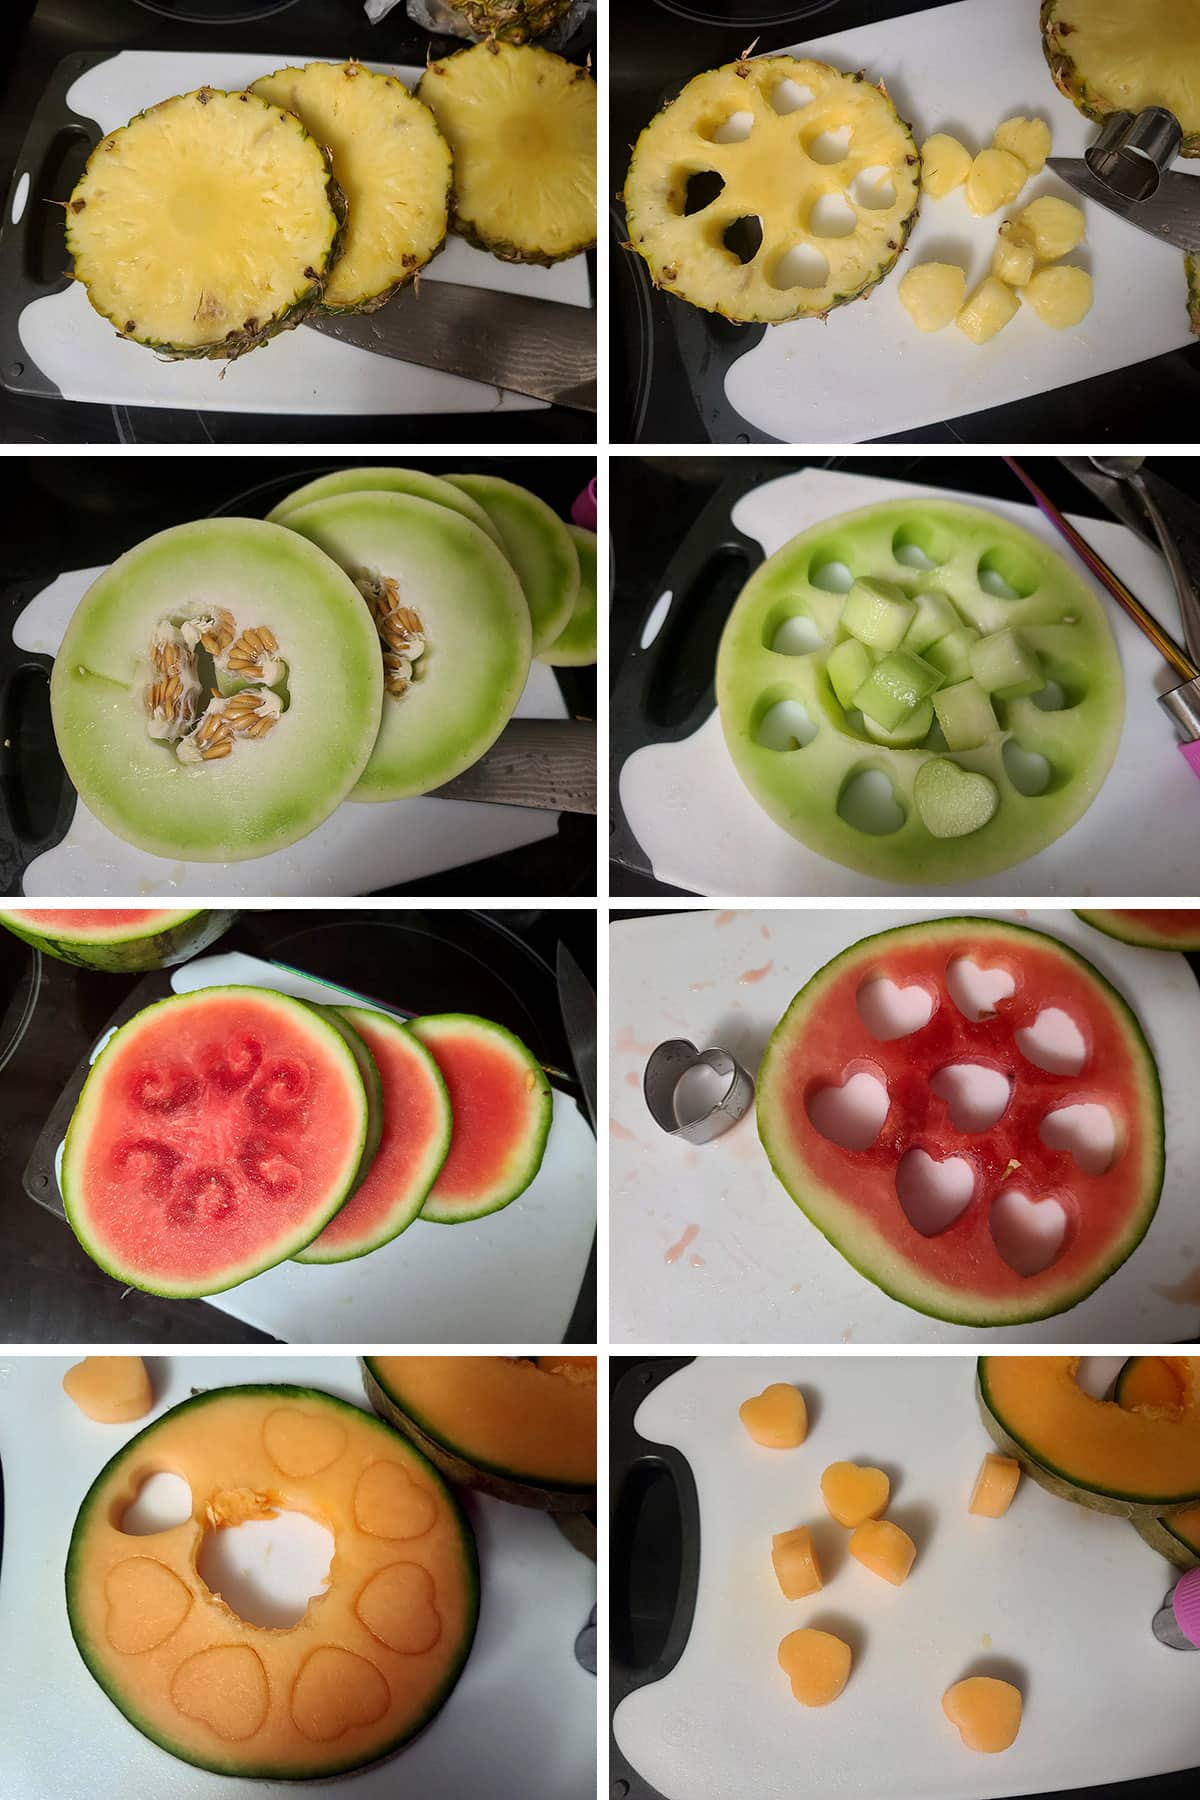 An 8 part image showing slices of pineapple, honeydew, watermelon, and cantaloupe having heart shaped pieces cut from them, with mini cookie cutters.